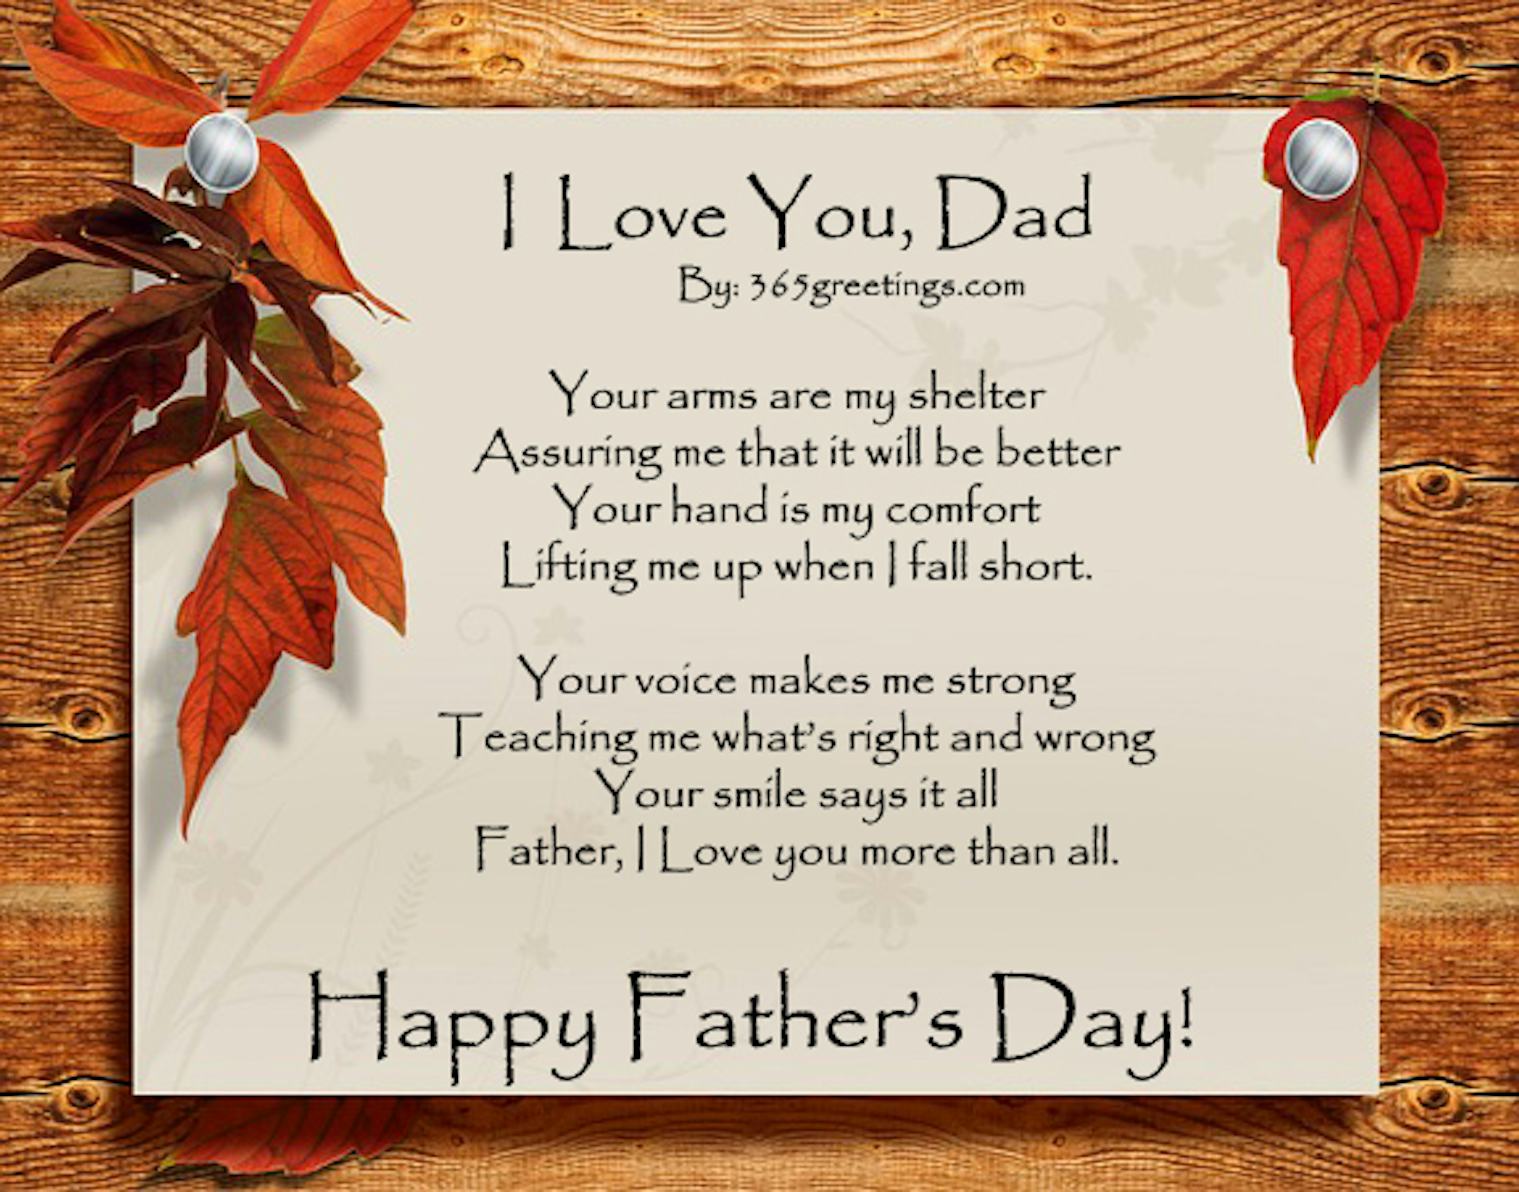 9 Father's Day Poems That'll Make You and Your Dad Tear Up